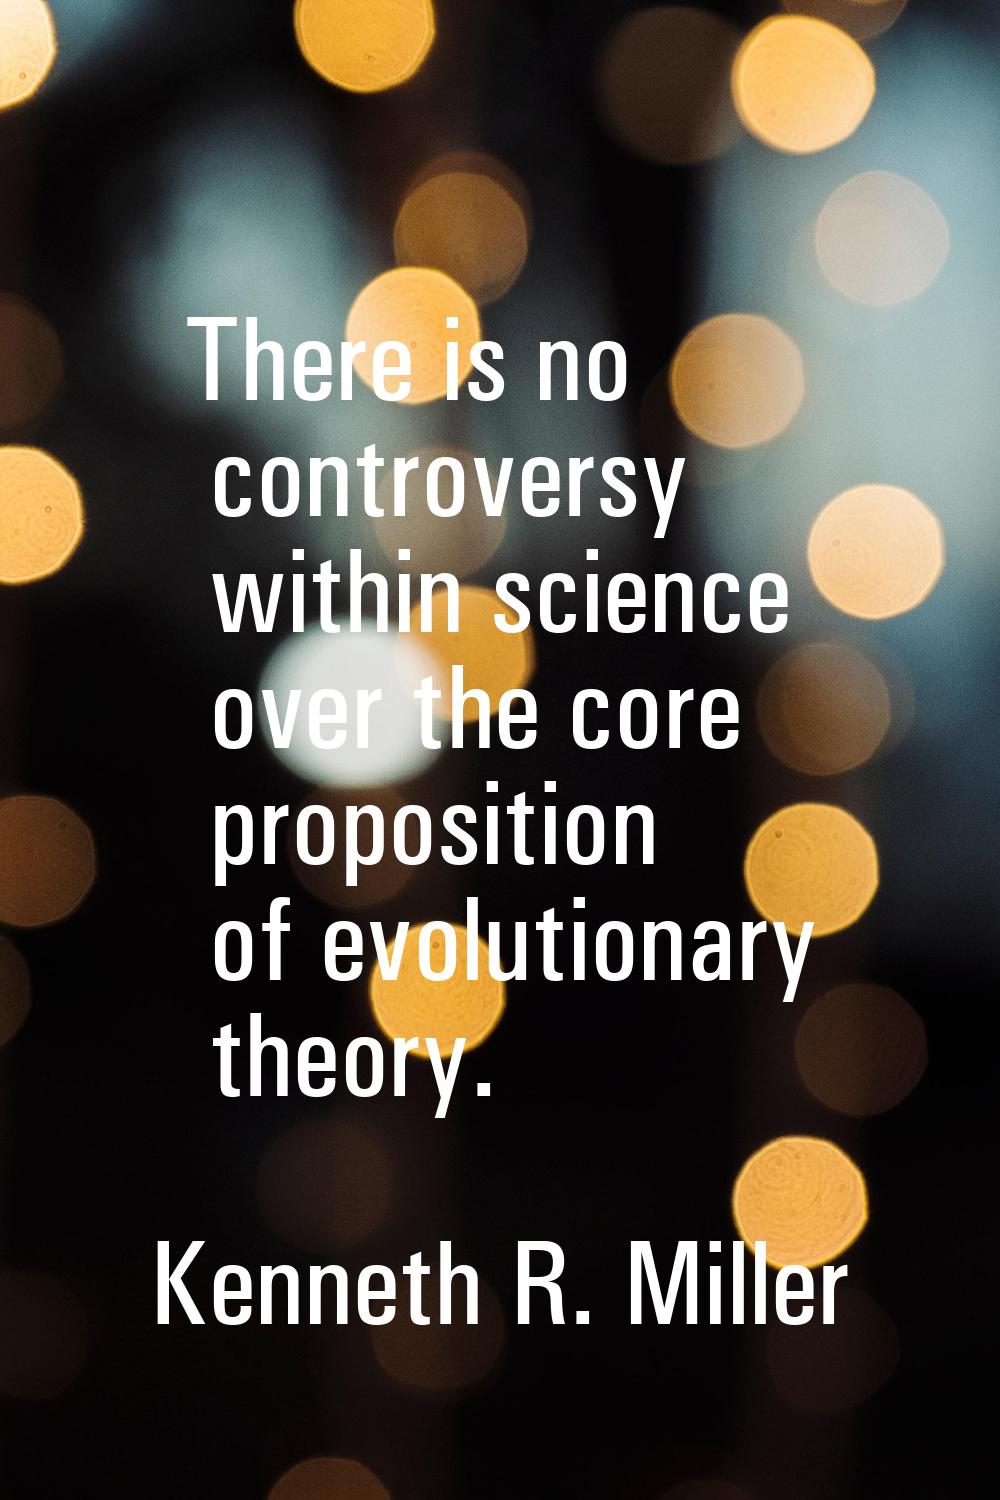 There is no controversy within science over the core proposition of evolutionary theory.